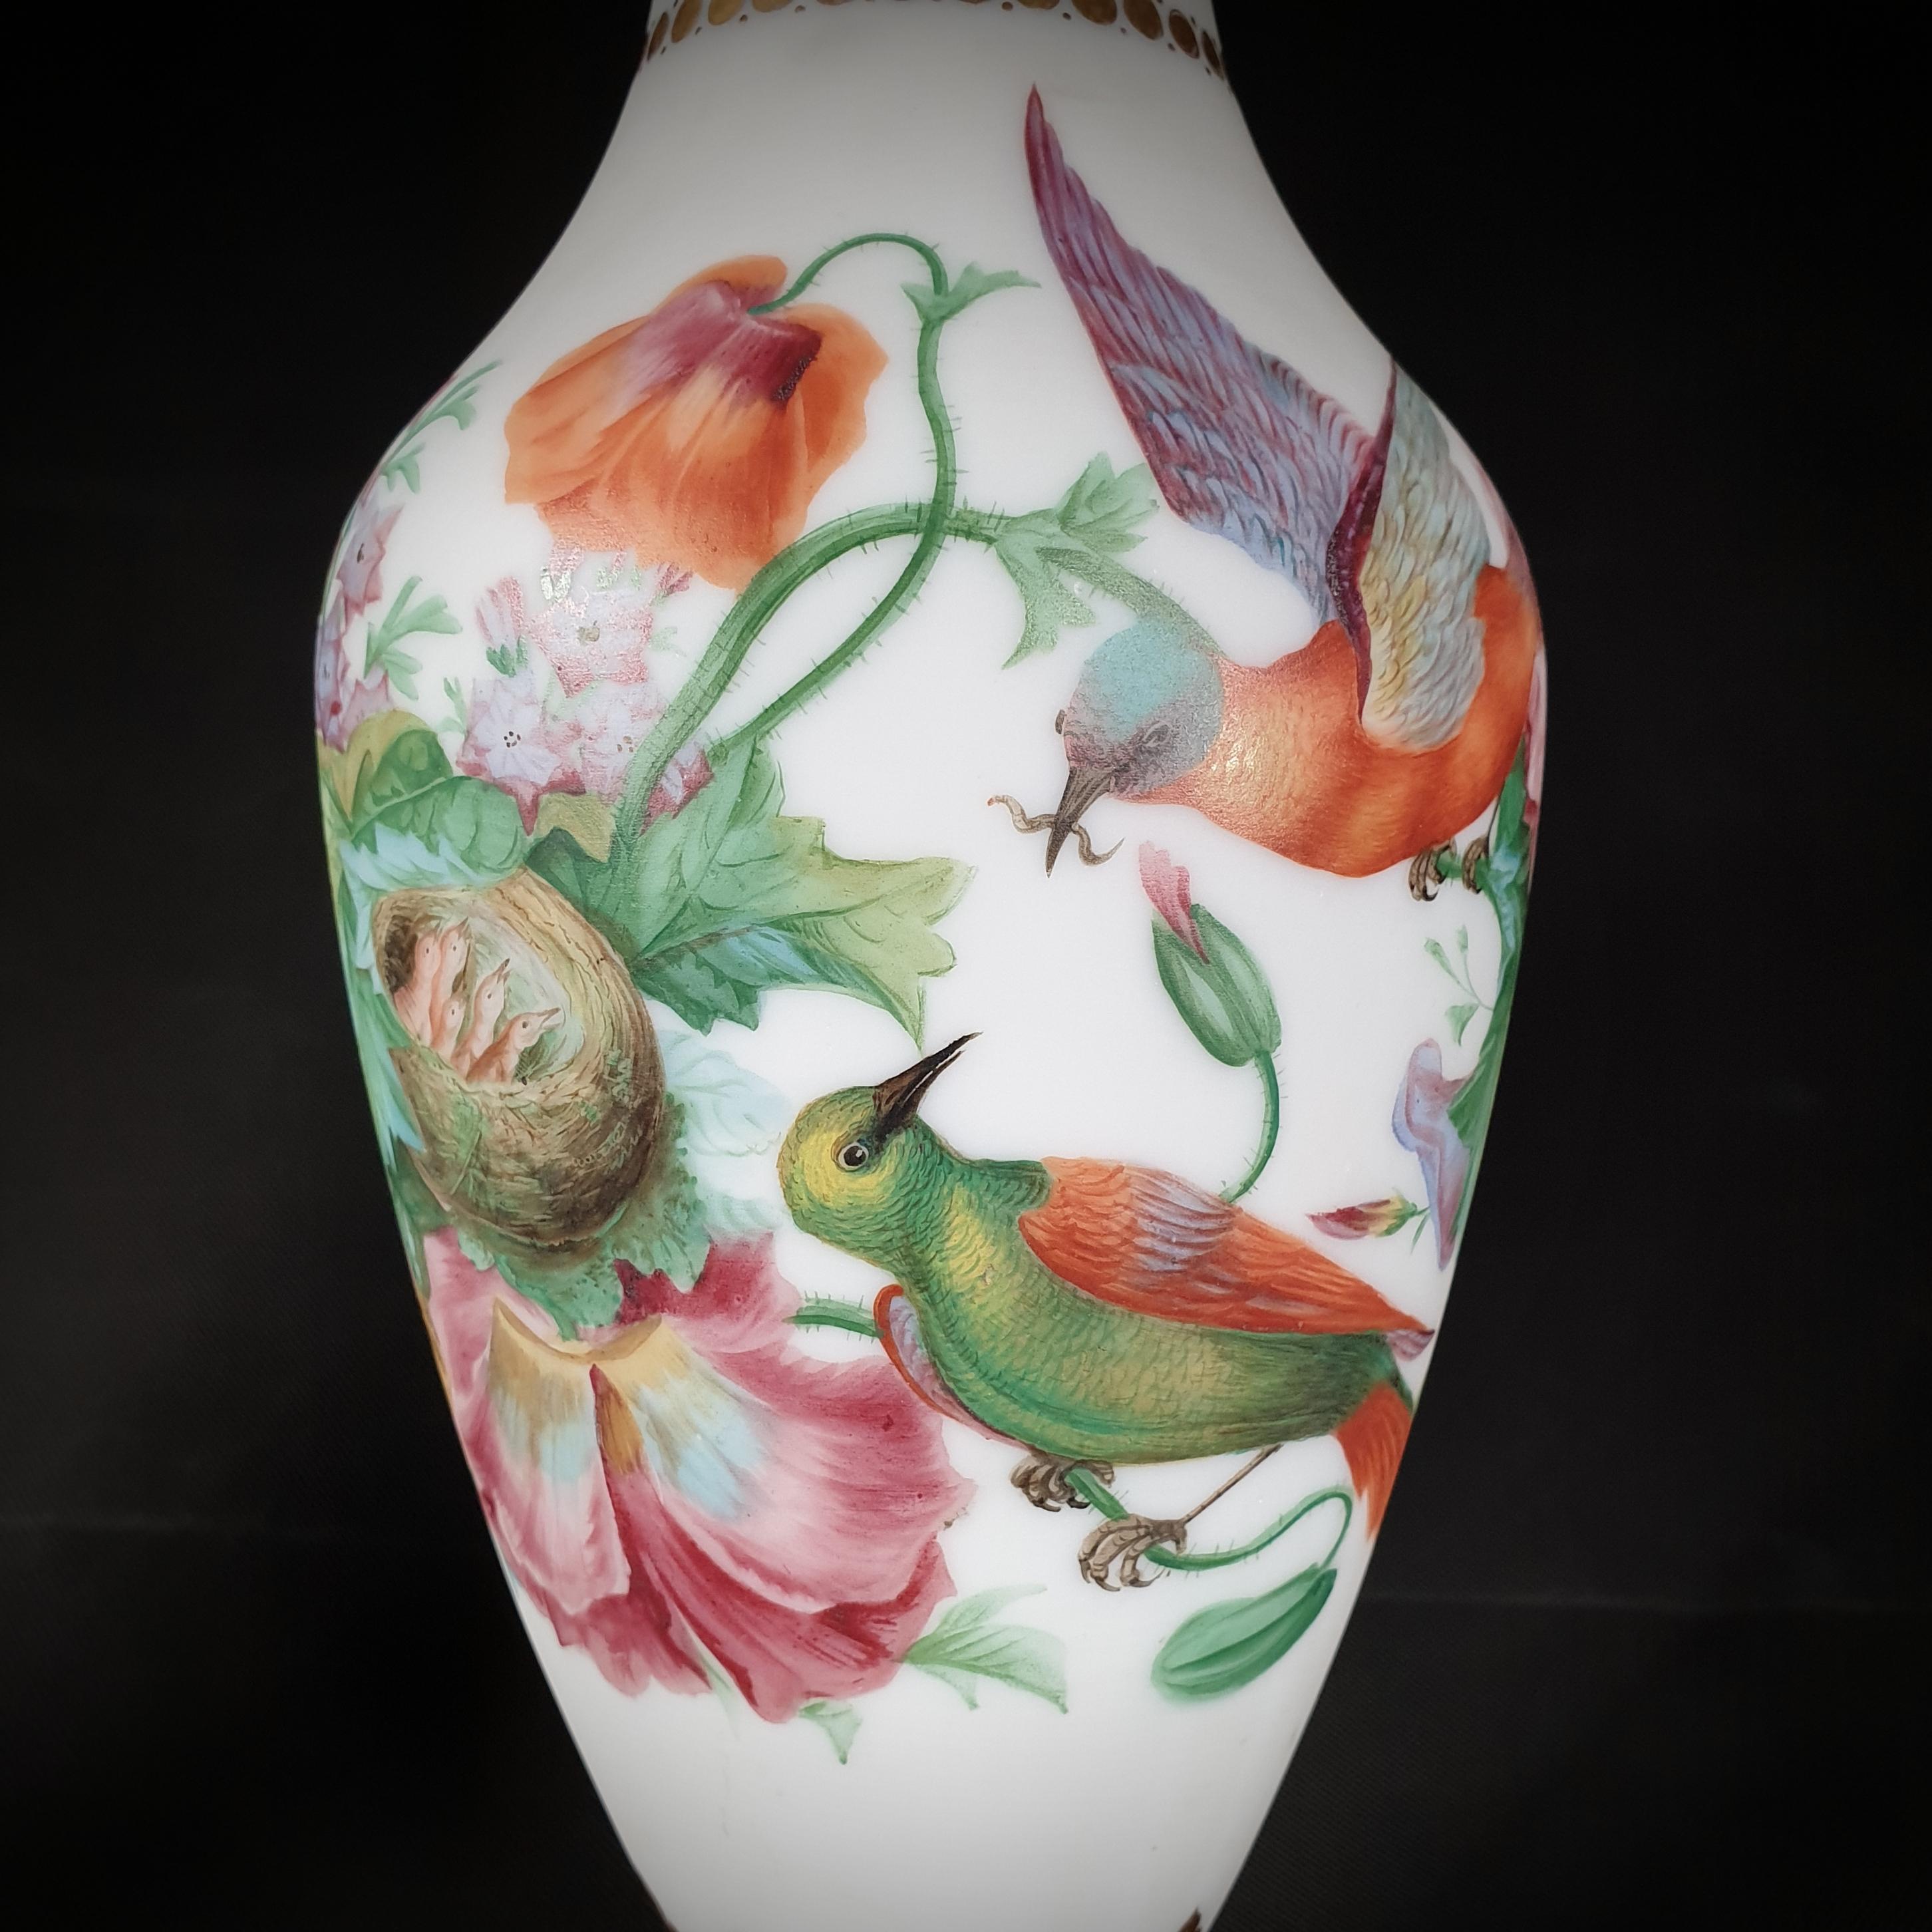 French Pair of Opaque Opaline Glass Vases Hand-Painted with Birds and Flowers Late 19th For Sale